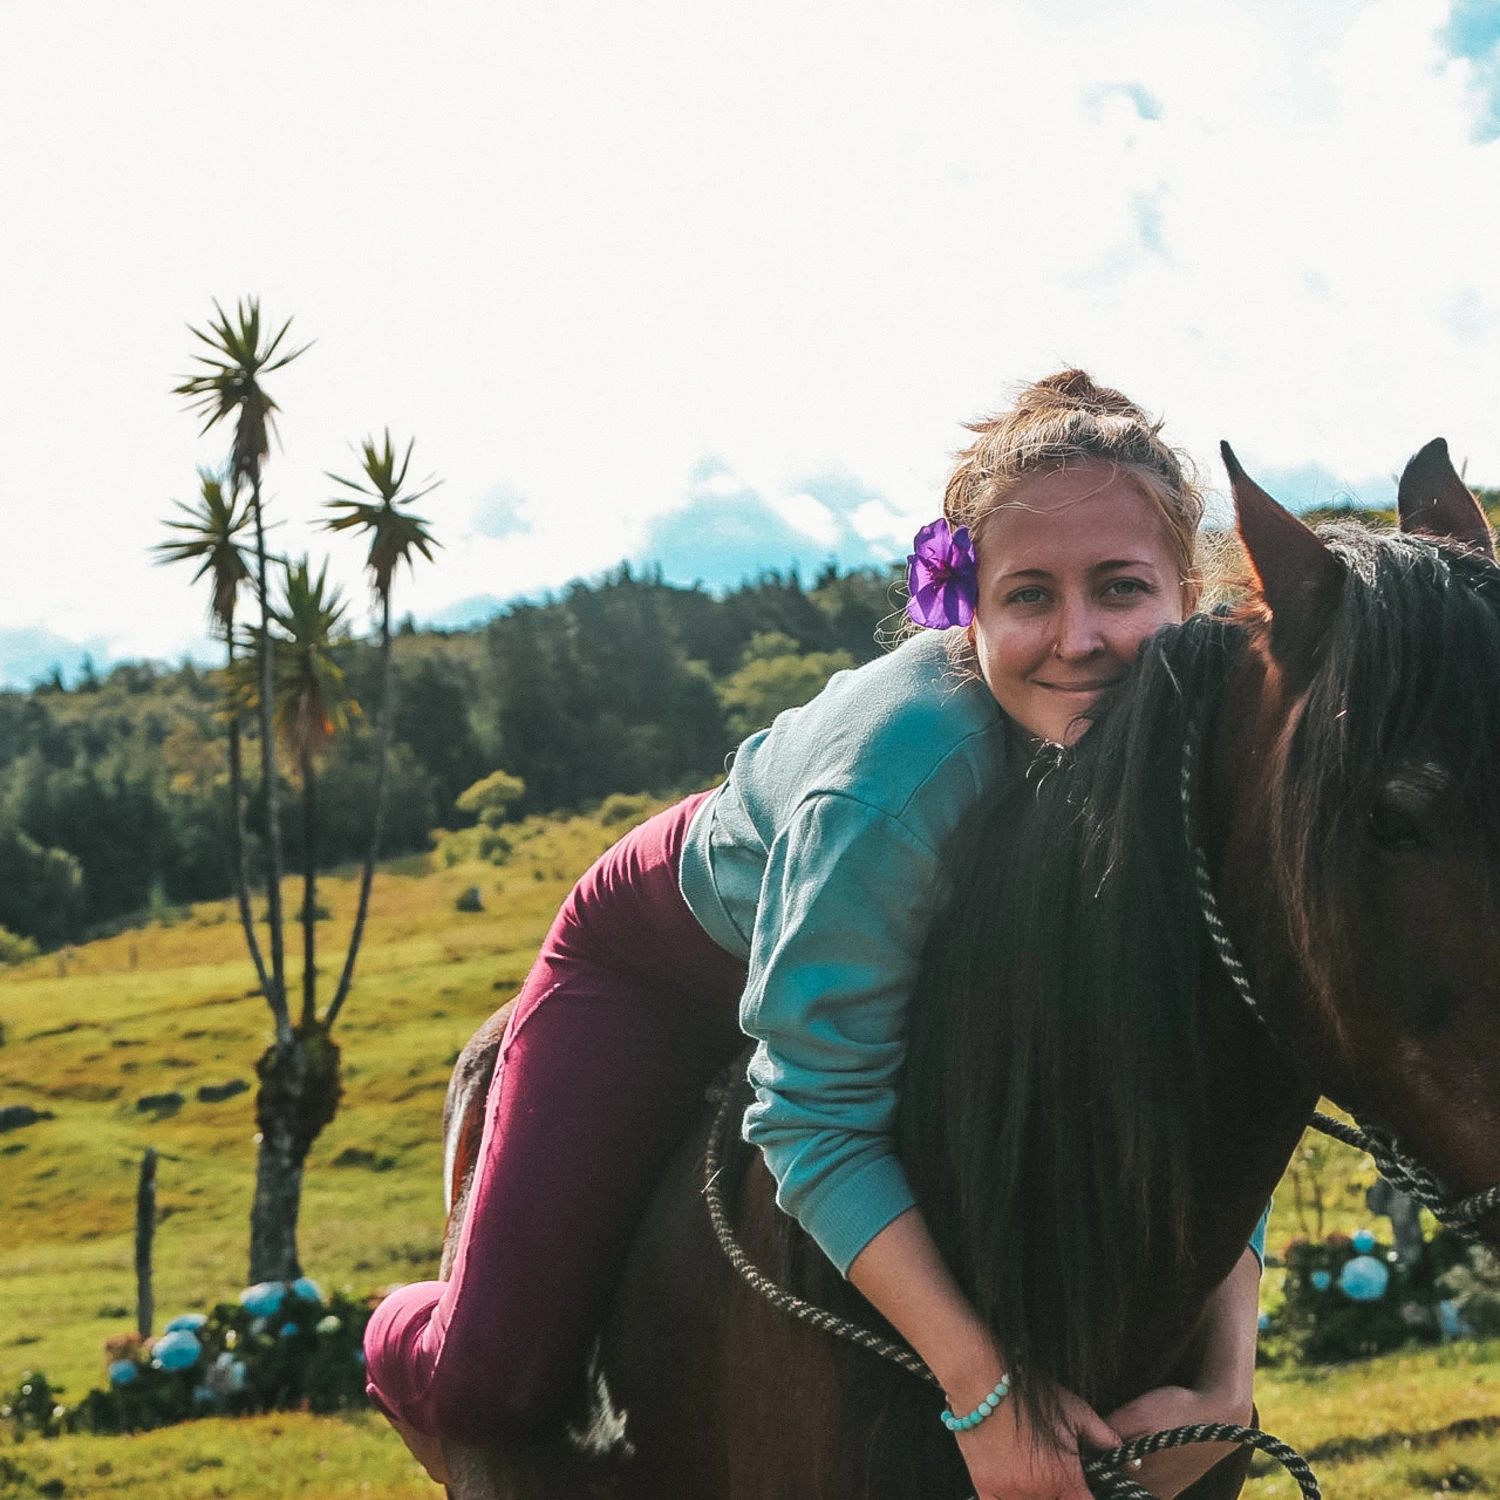 Travel advisor riding on a horse in lush green field